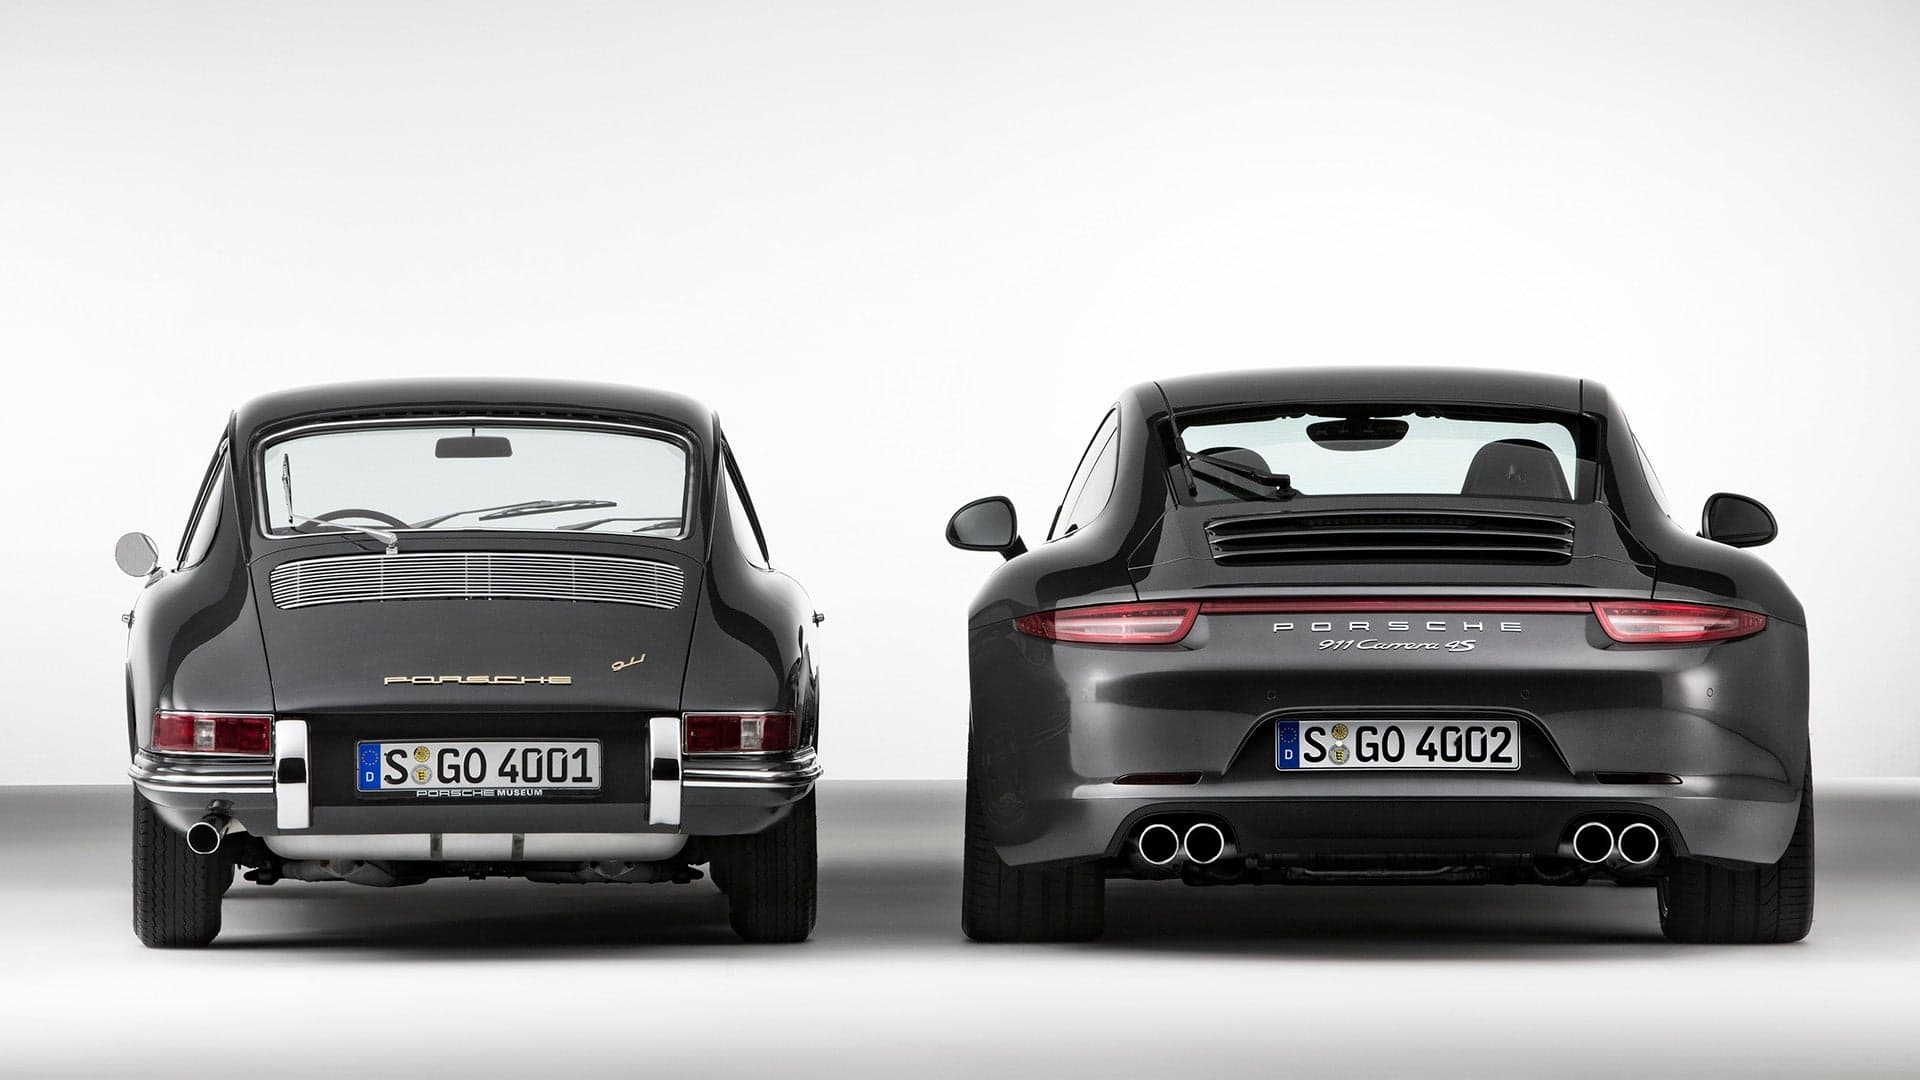 Watch This Brief and Fascinating History of Porsche’s Most Famous Cars